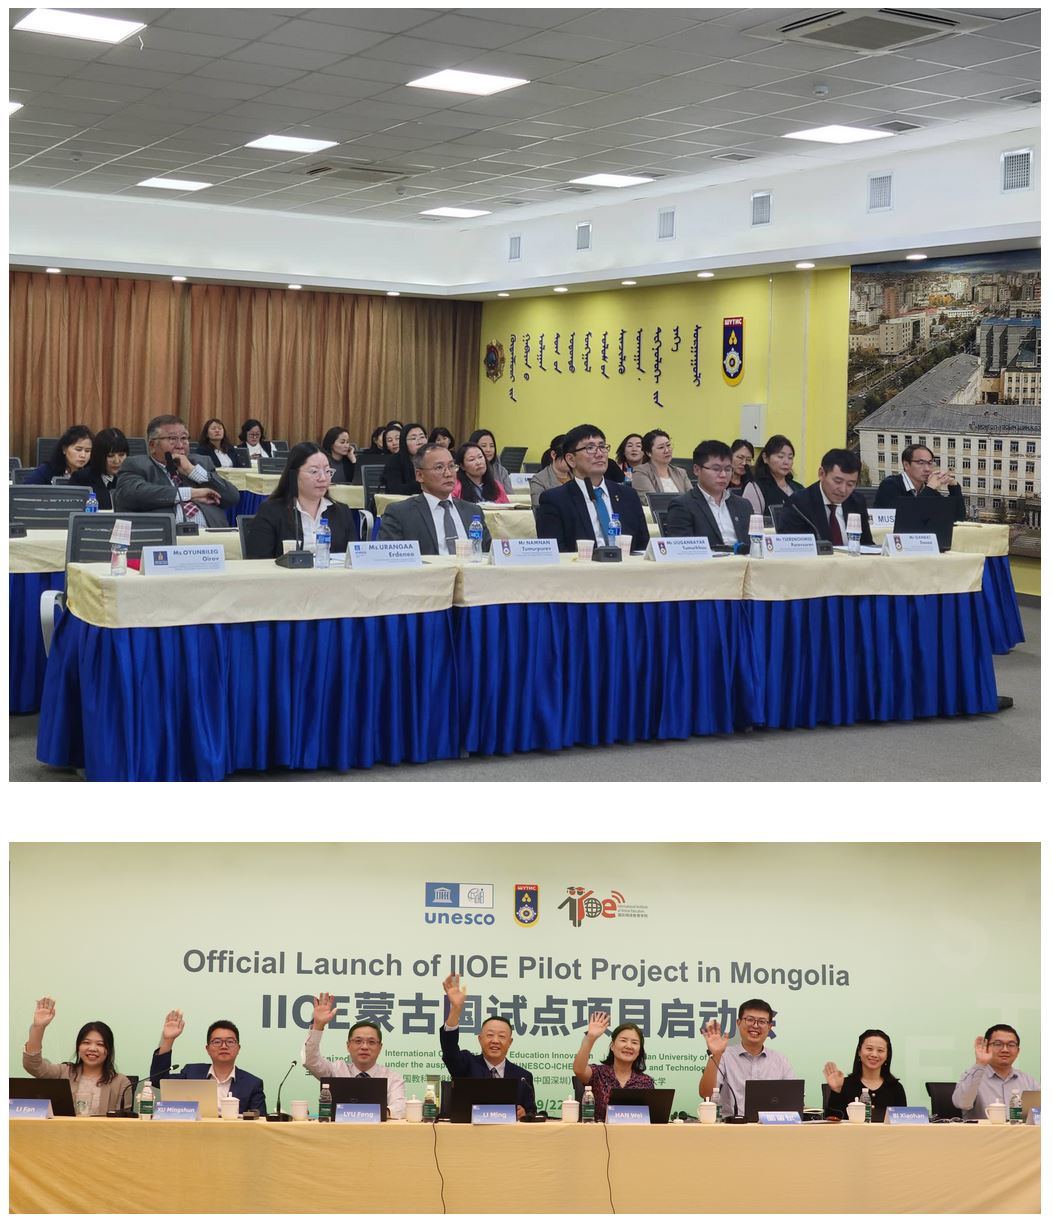 IIOE Pilot Project in Mongolia Launched